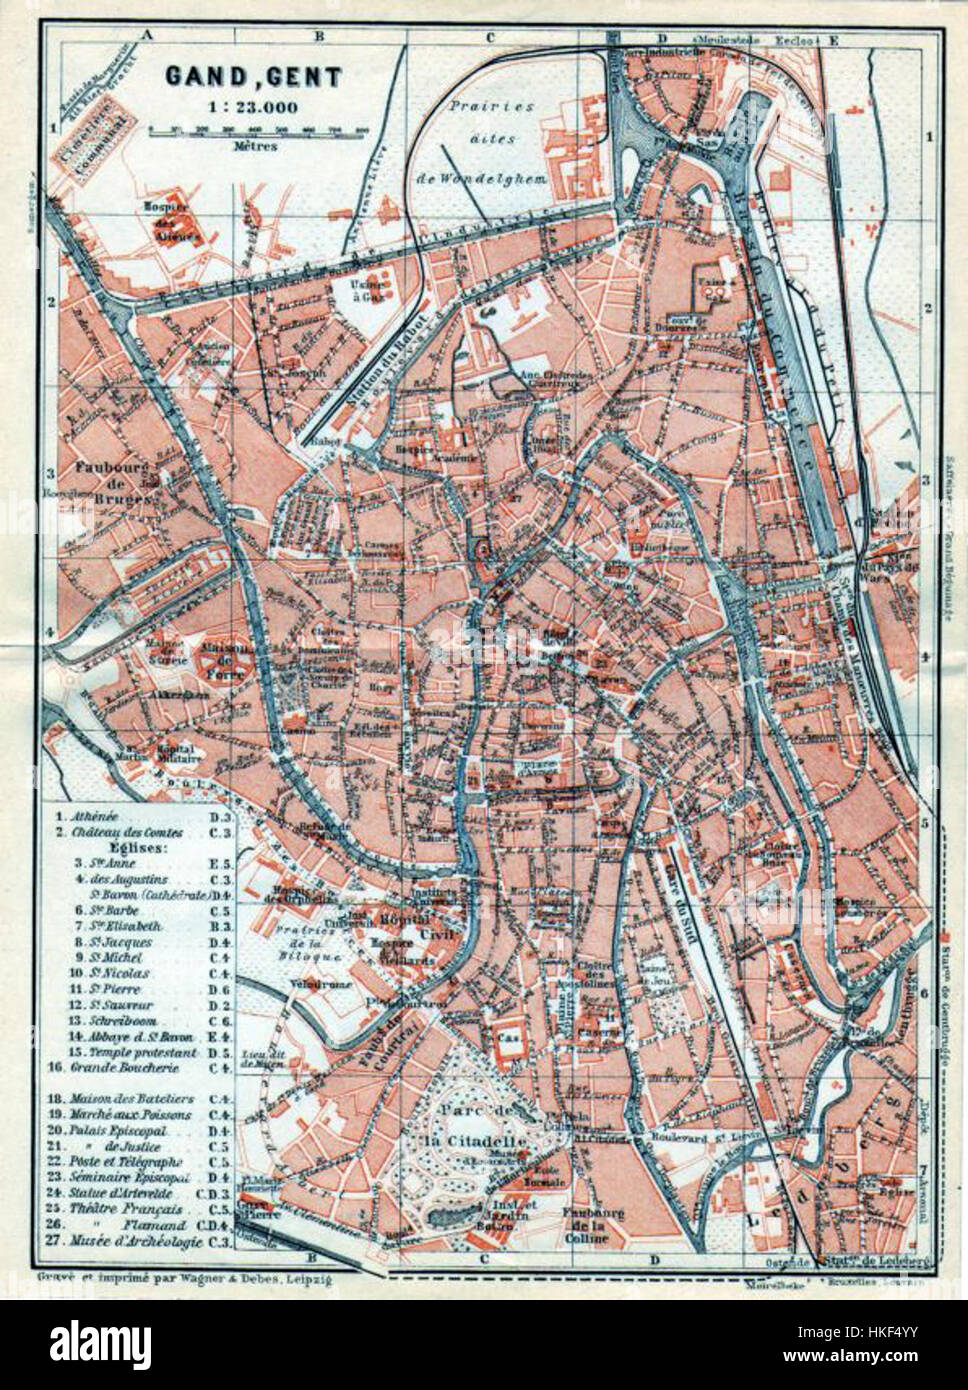 Map of Ghent by Wagner and Debes, 1910 Stock Photo